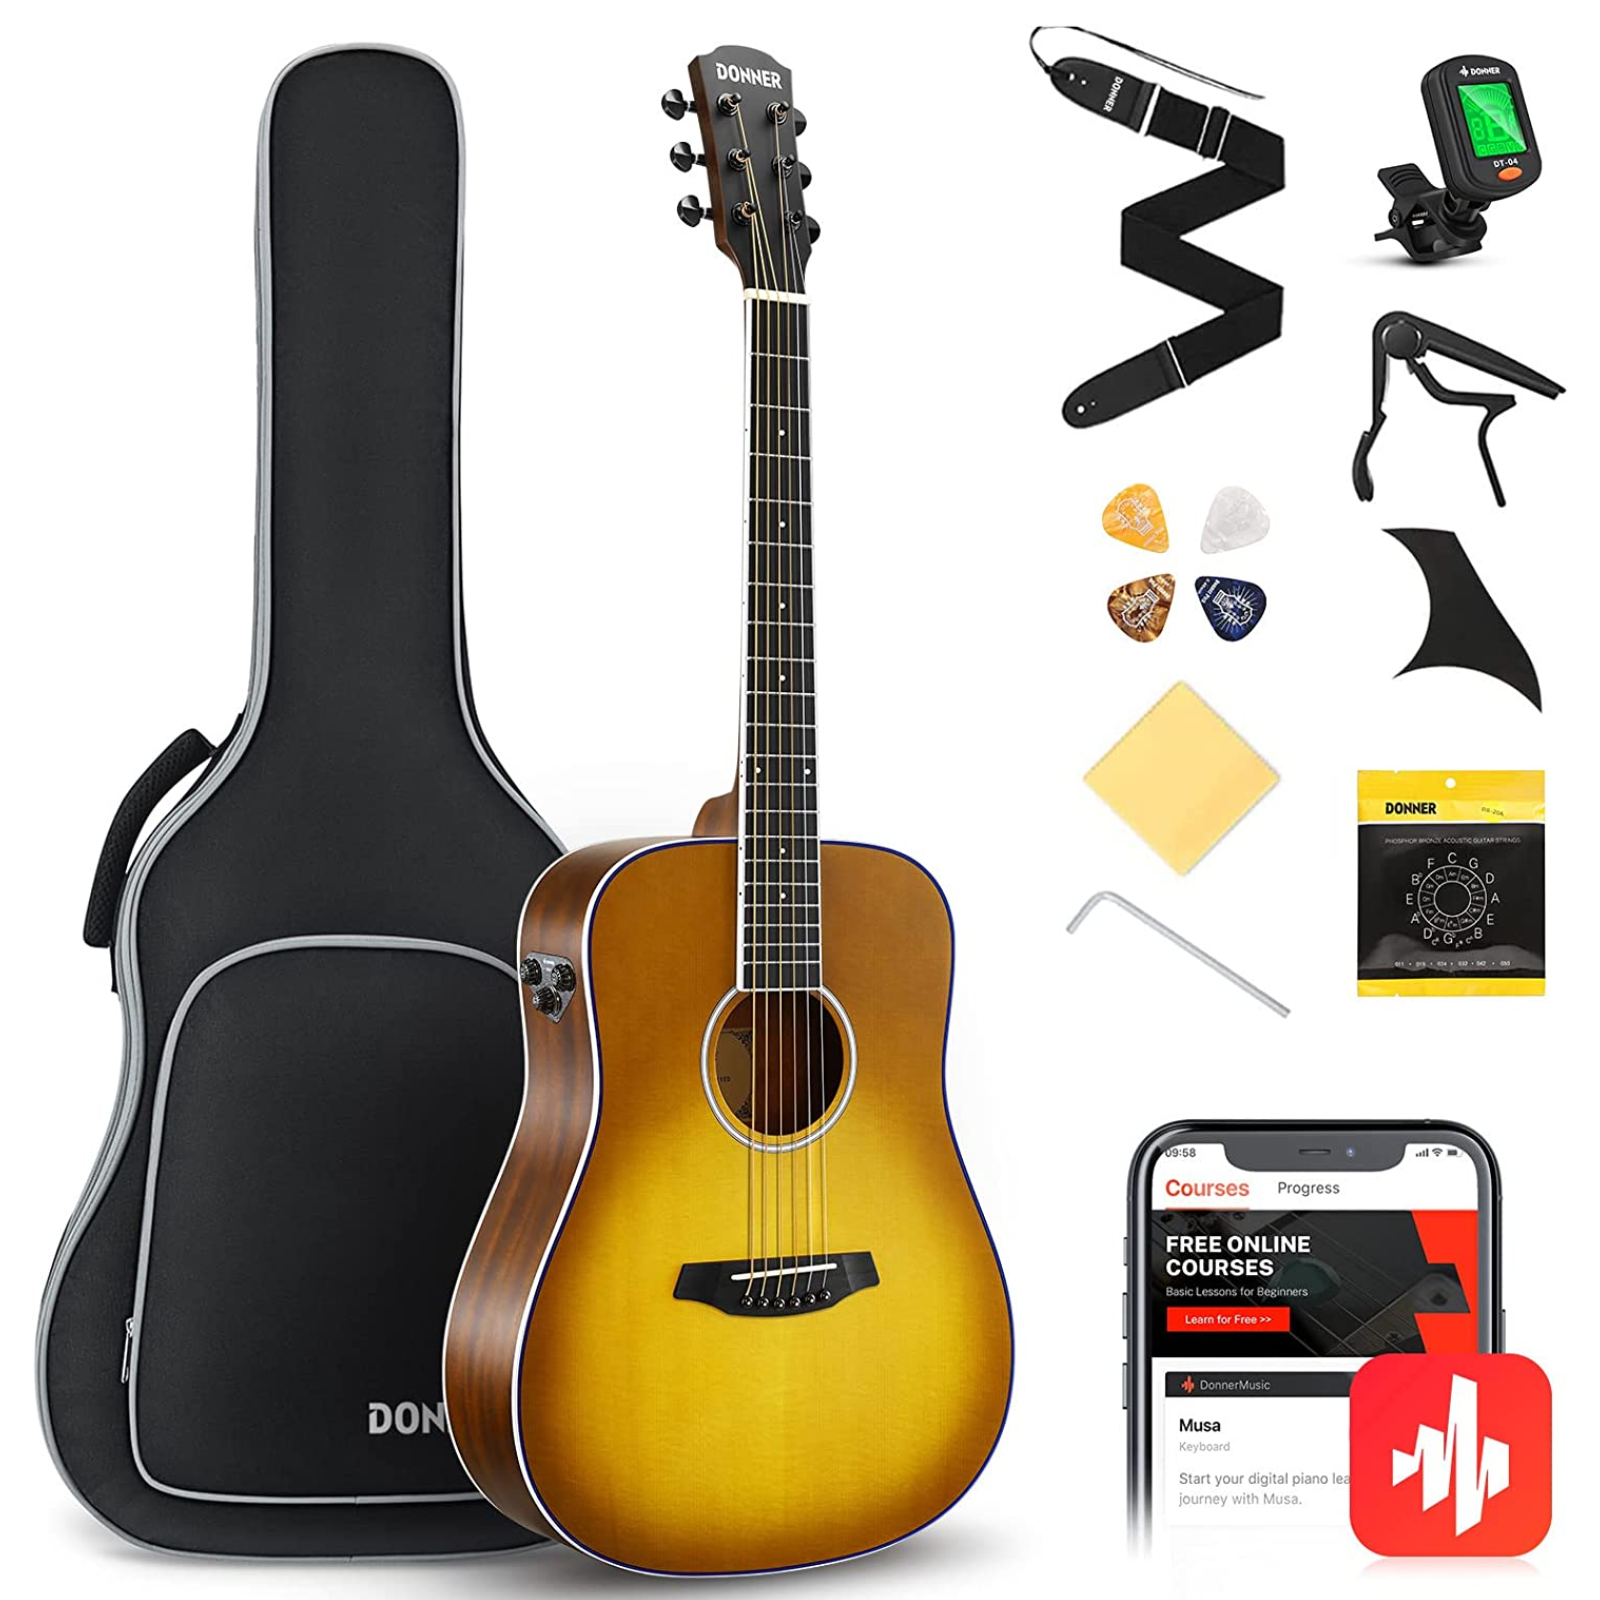 

Donner DAT-115 36" Electric Acoustic Guitar Kit with Effect System Pickup Reverb Delay Effects 3/4 Size Spruce Mahogany Wood